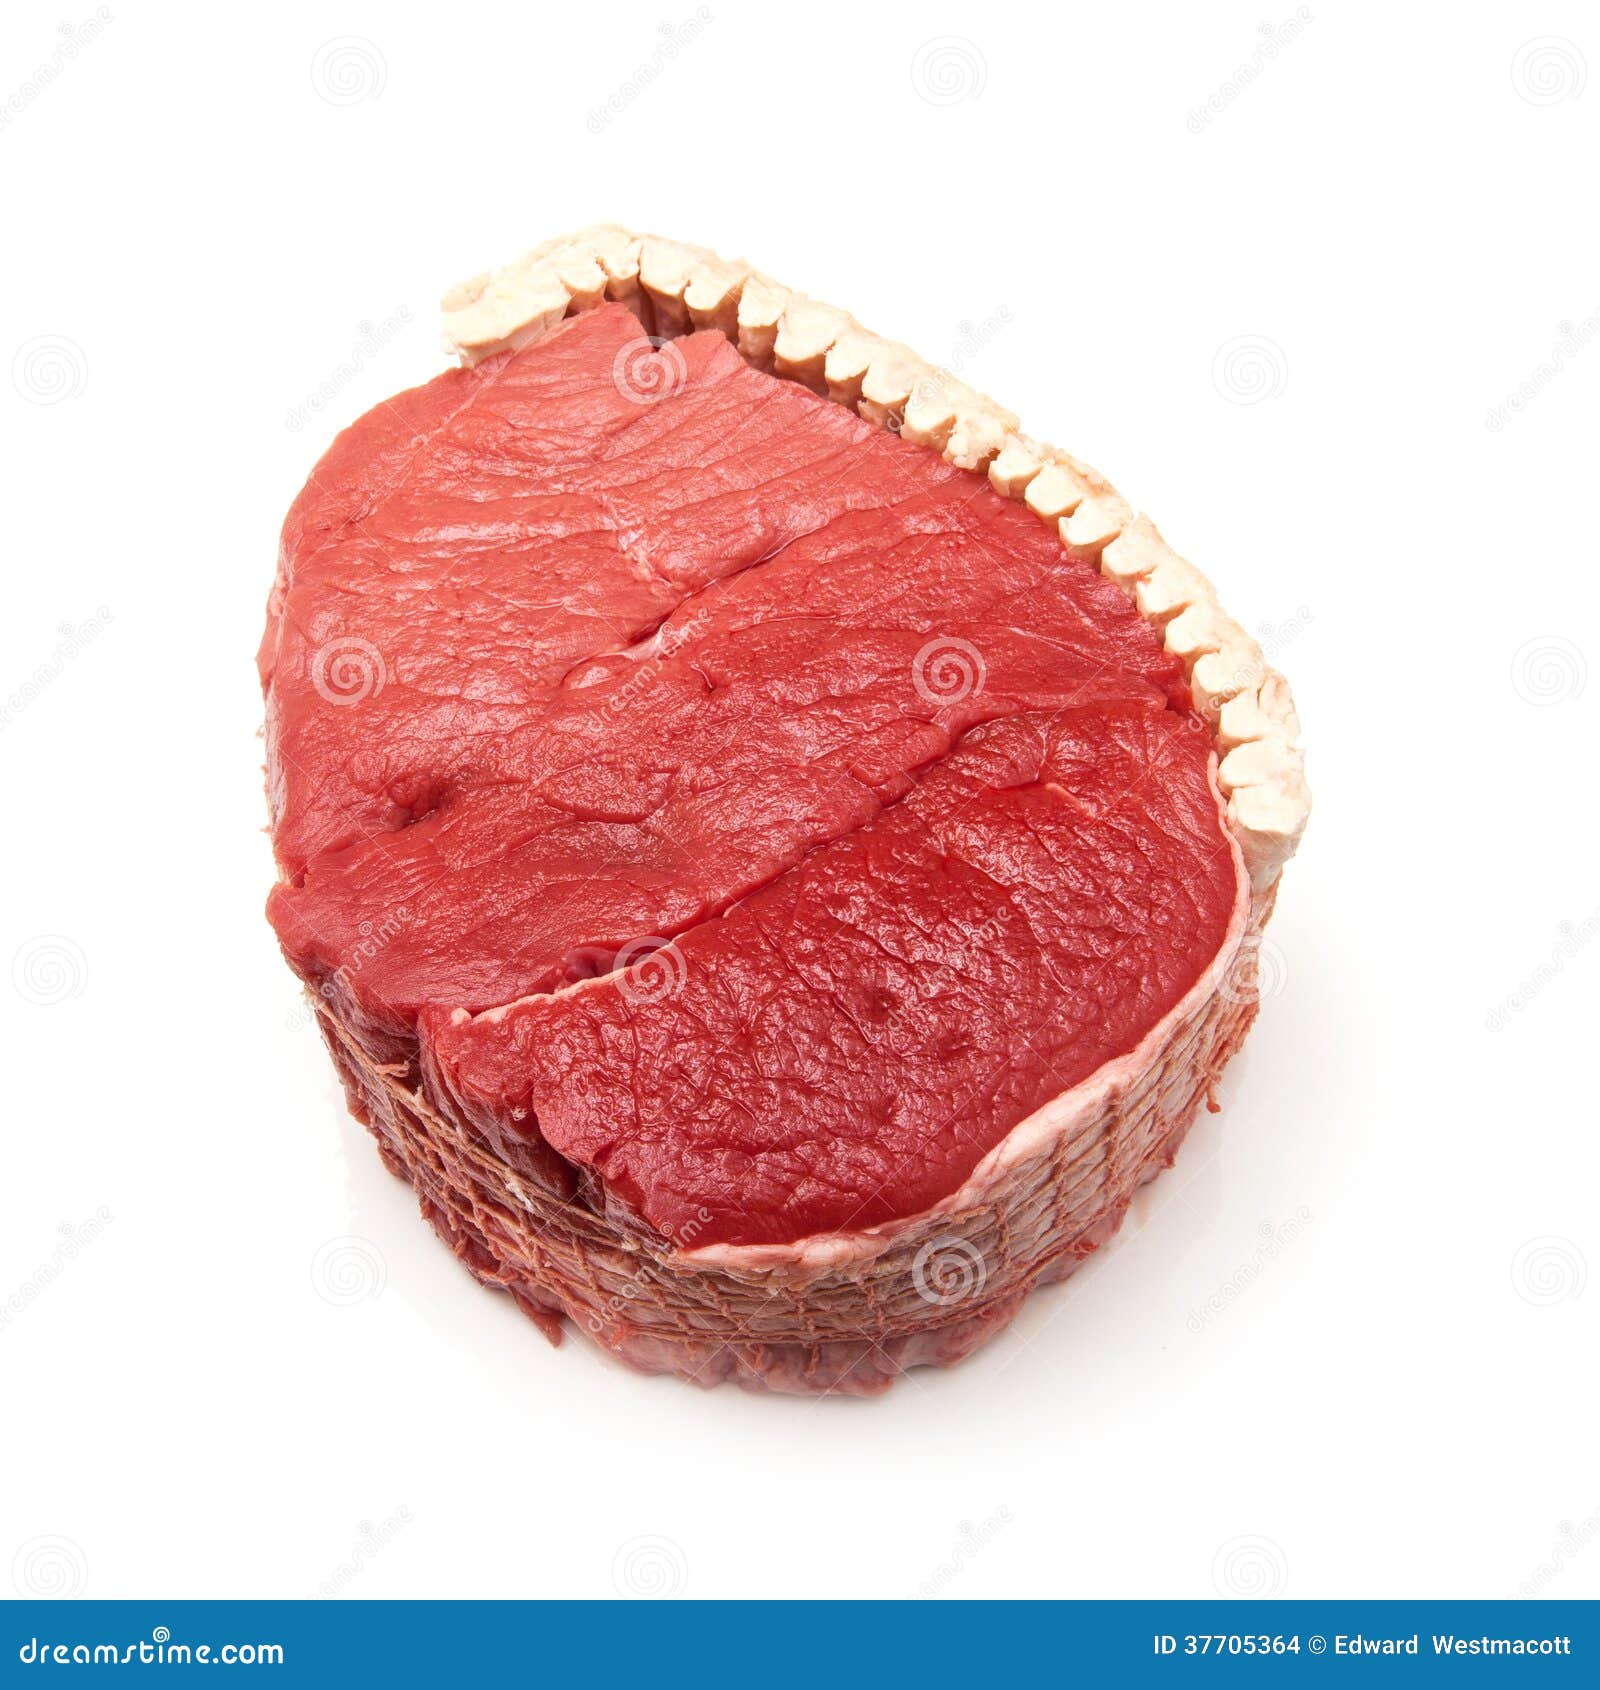 topside of british beef joint